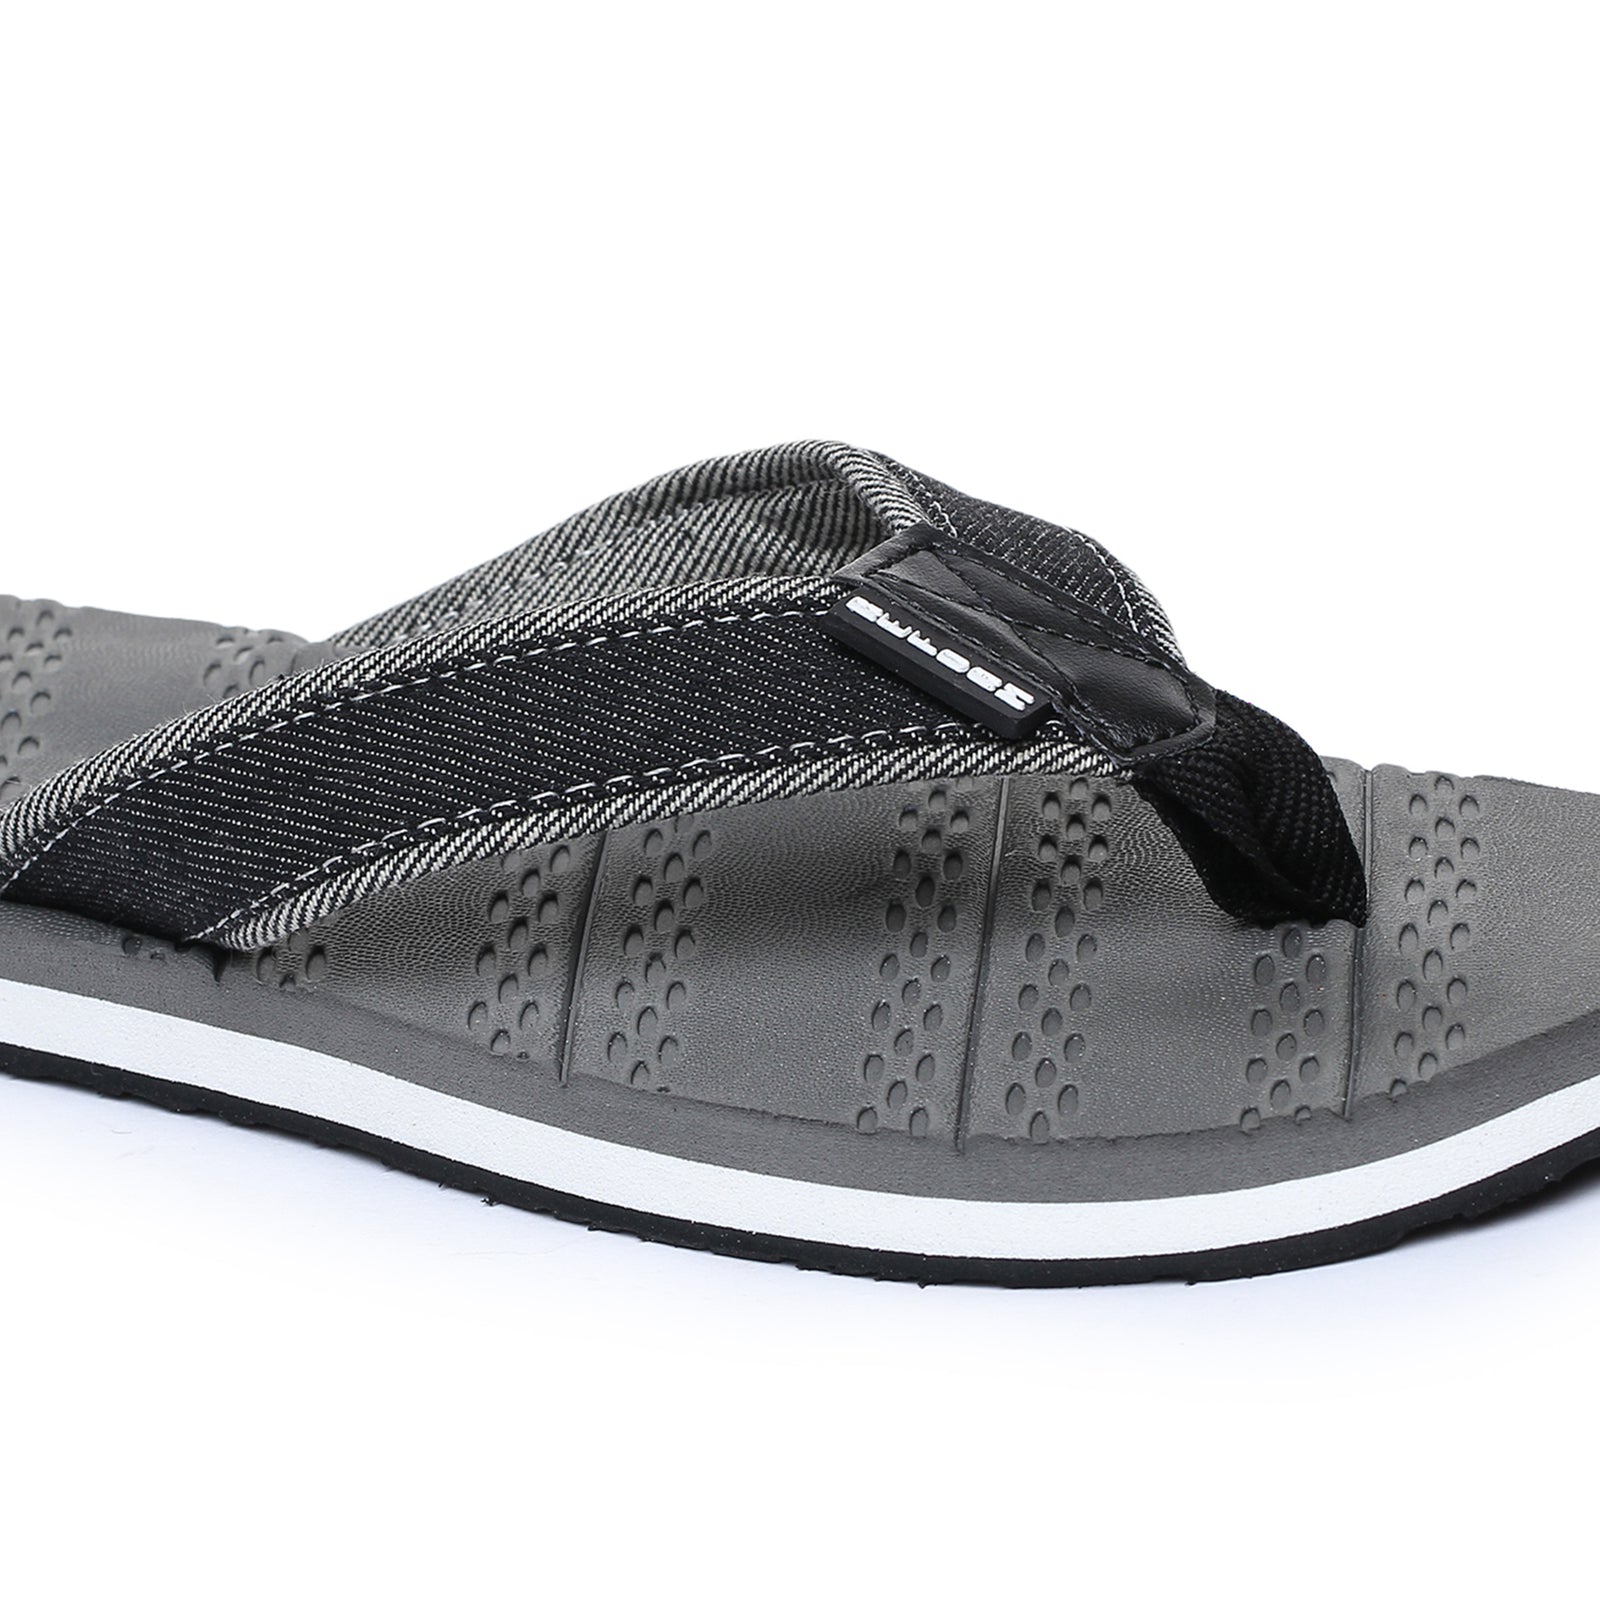 Grey Solid Fabric Slip On Casual Slippers For Men